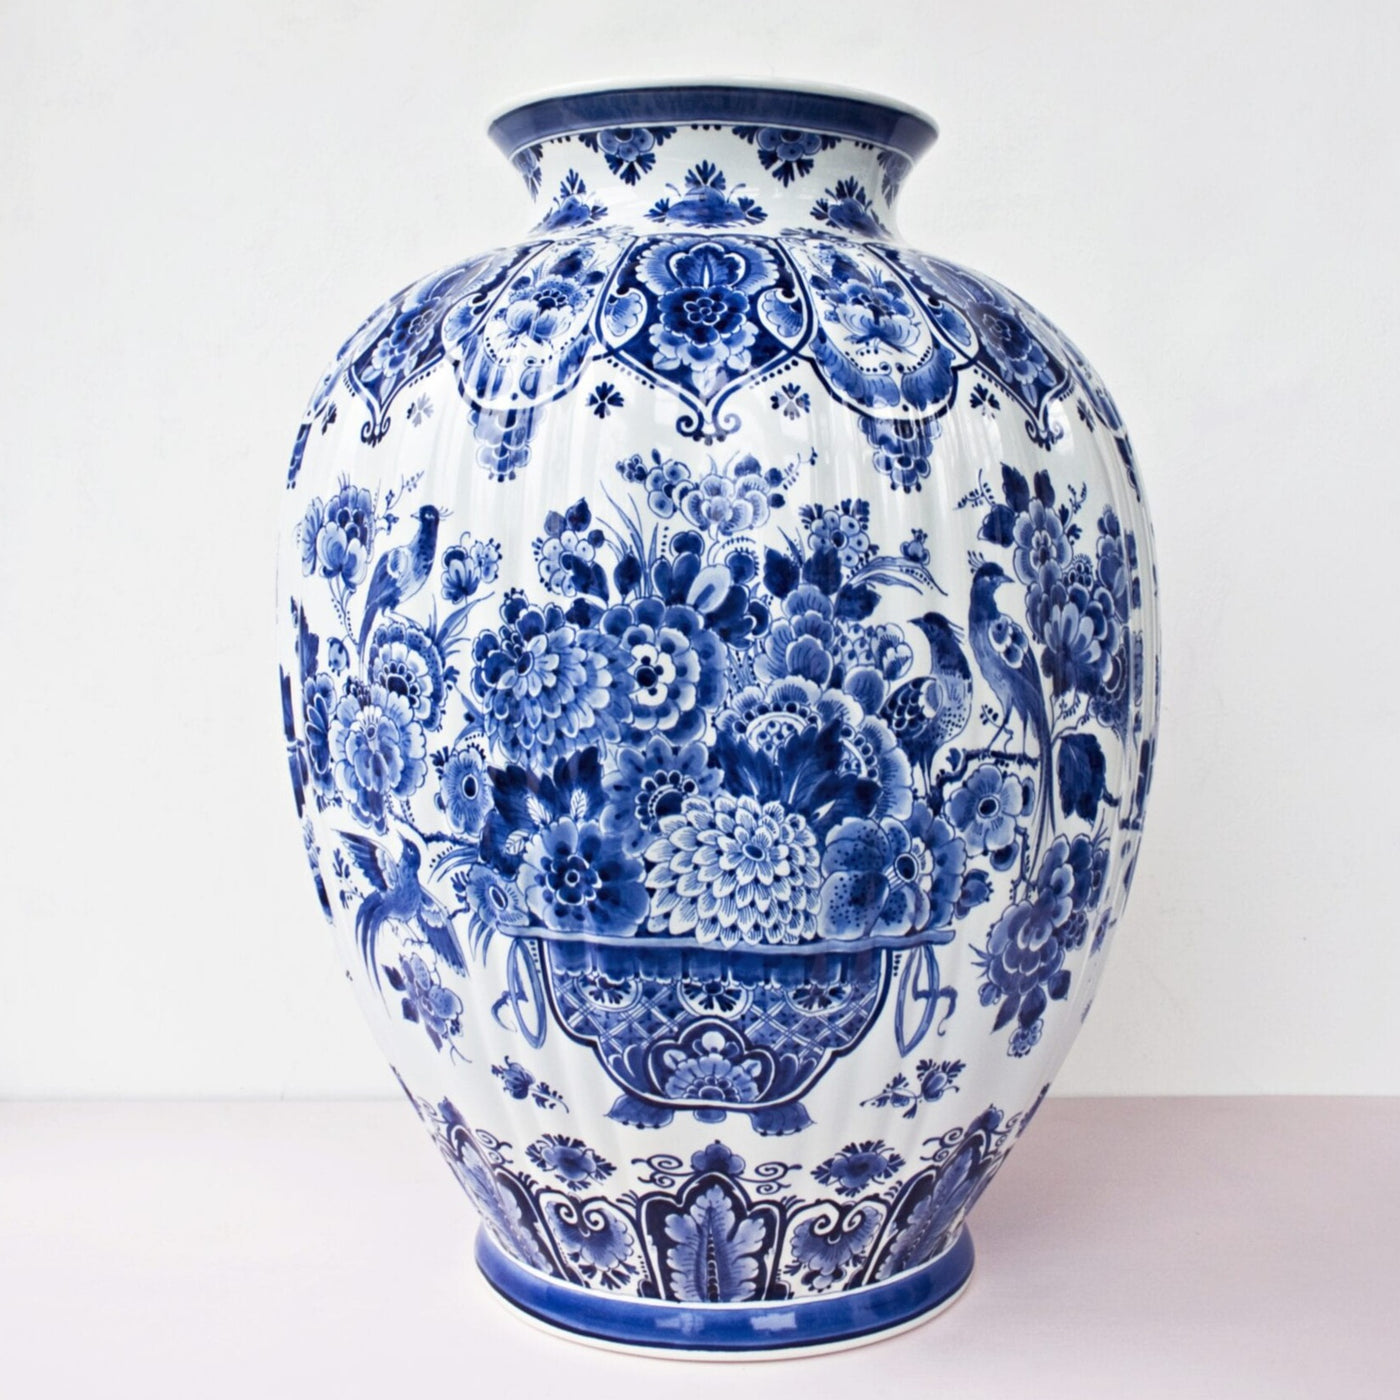 Iconic Vase Hand-Painted by Royal Delft